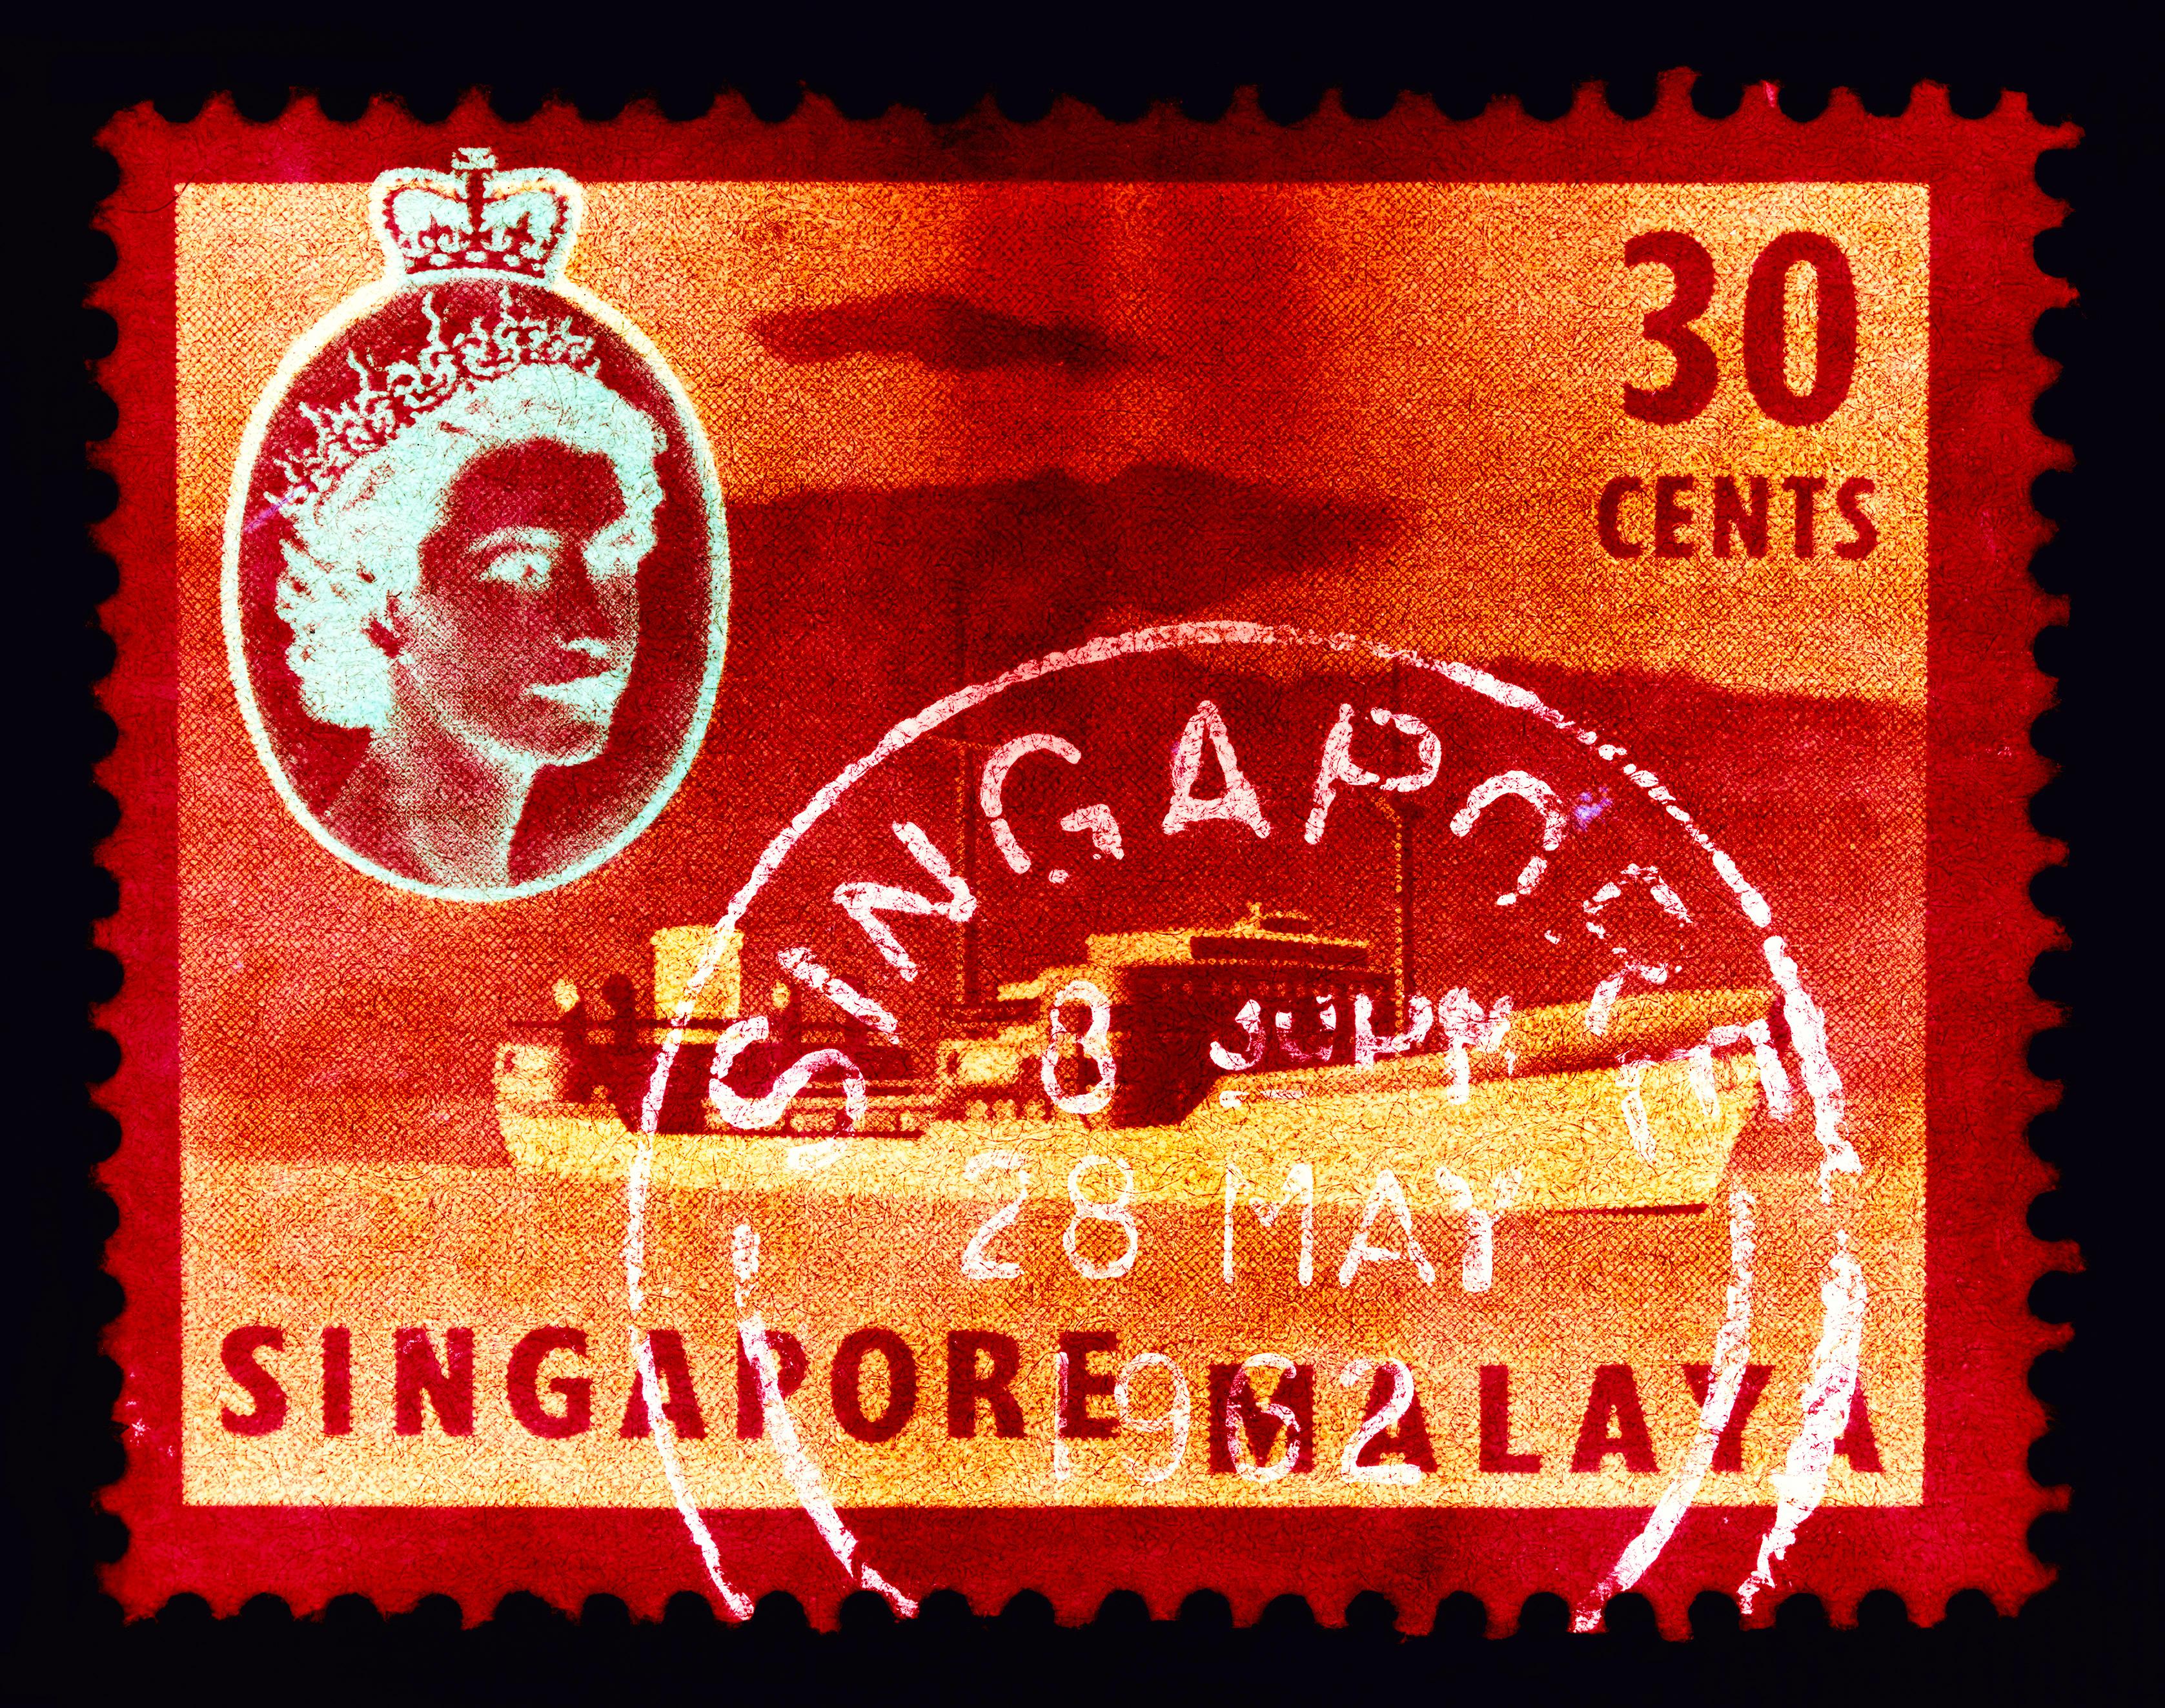 Heidler & Heeps Color Photograph - Singapore Stamp Collection, 30 Cents QEII Oil Tanker Red - Pop Art Color Photo